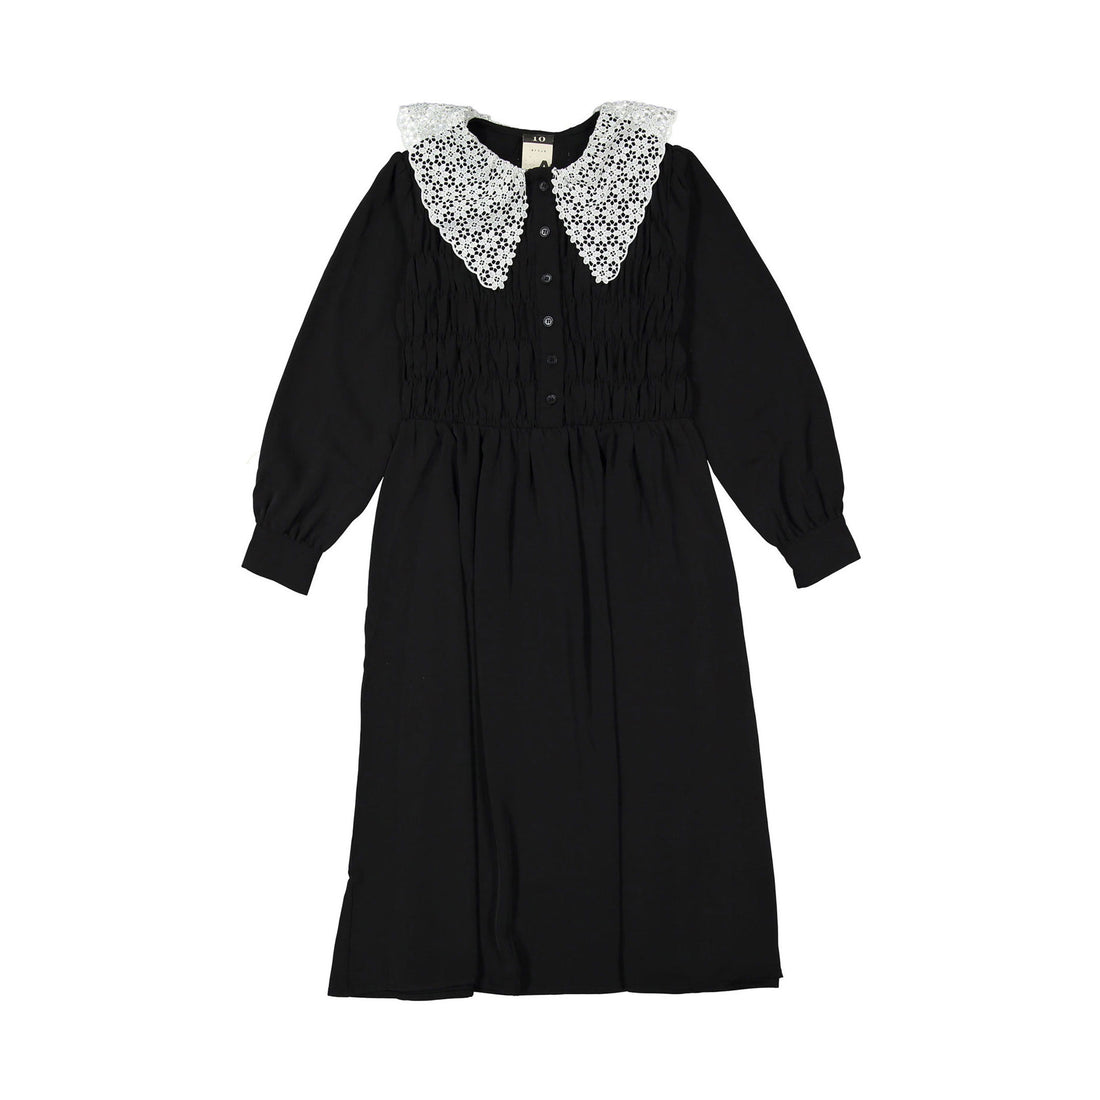 A4 Smocked Collared Dress